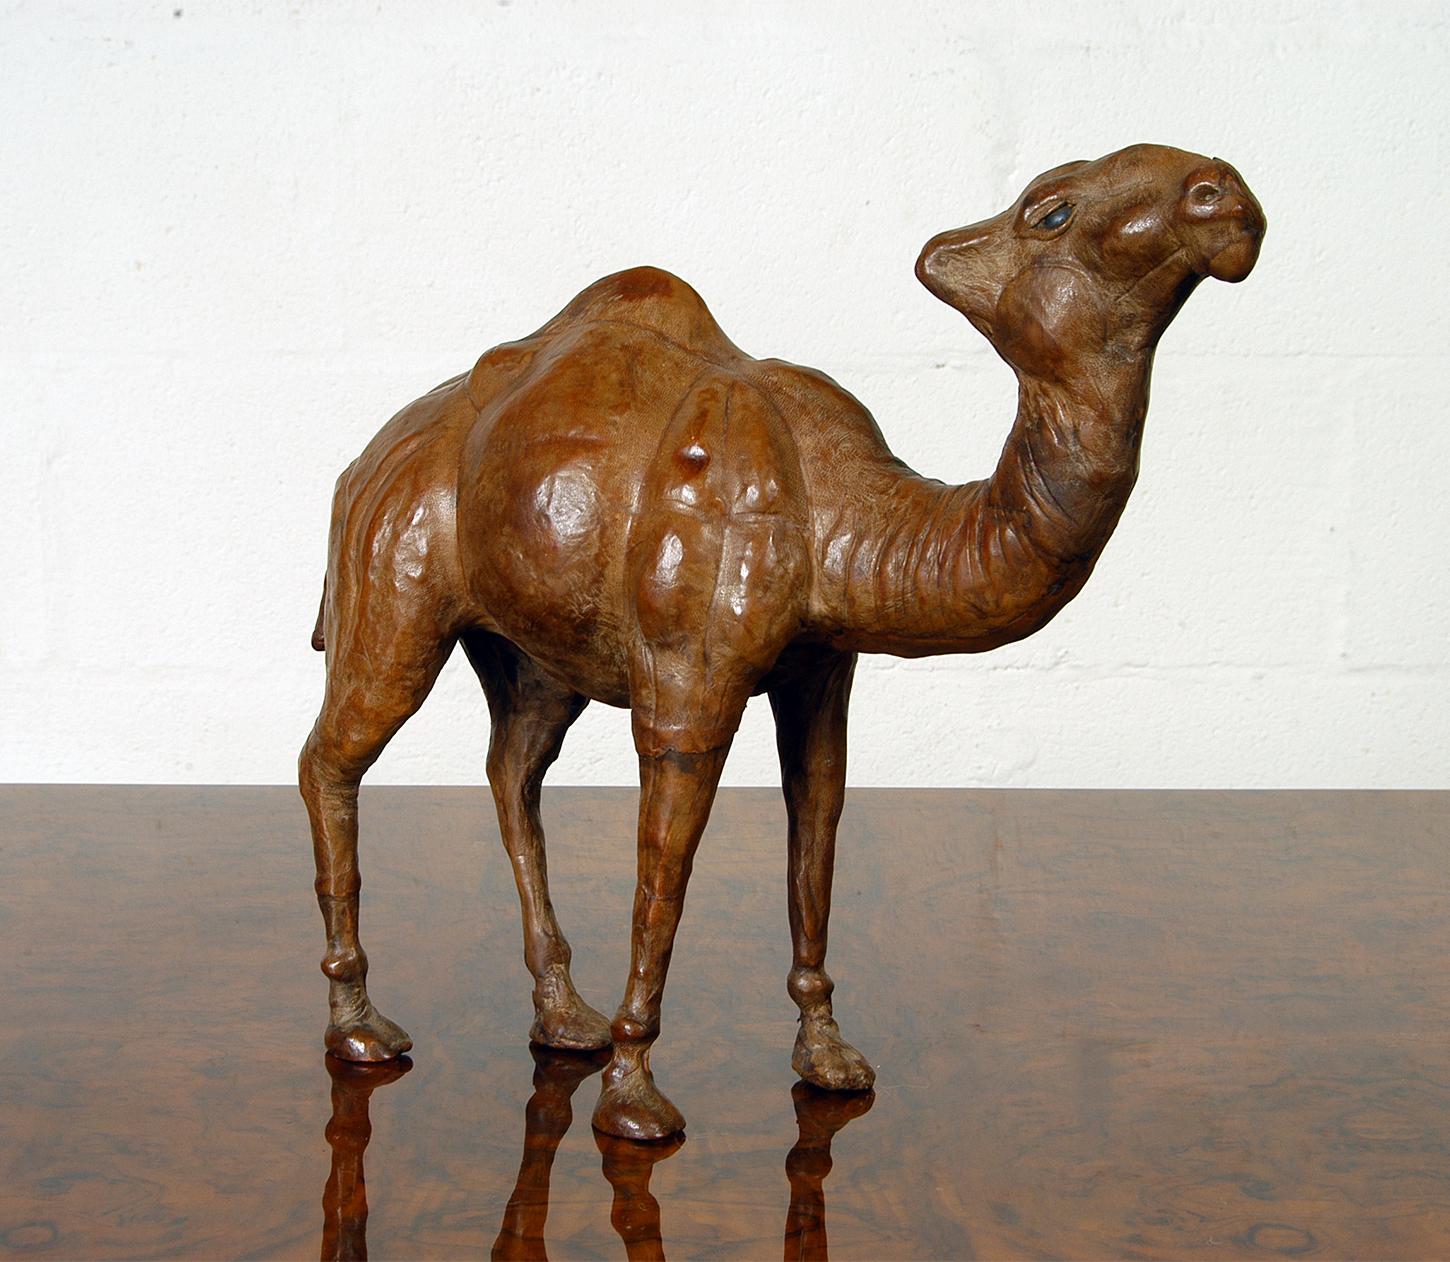 A very realistic, well modelled large leather camel bought in Sweden, but probably originating from the Middle East. The leather has a lovely patina, and feels like it really has some age. It also looks older and better modelled than most other